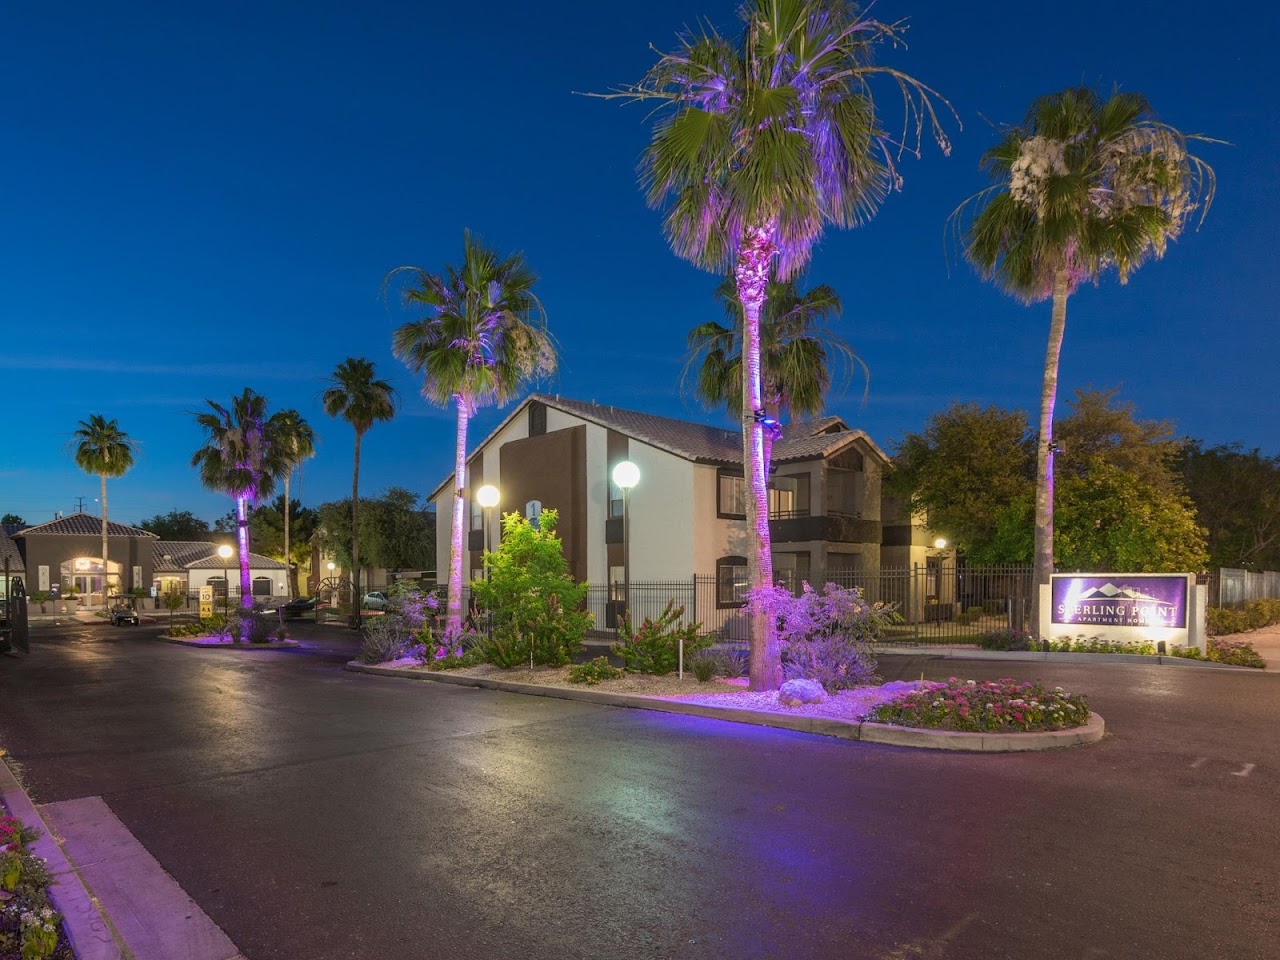 Photo of STERLING POINT APTS PHASE II. Affordable housing located at 3802 E BASELINE RD PHOENIX, AZ 85042